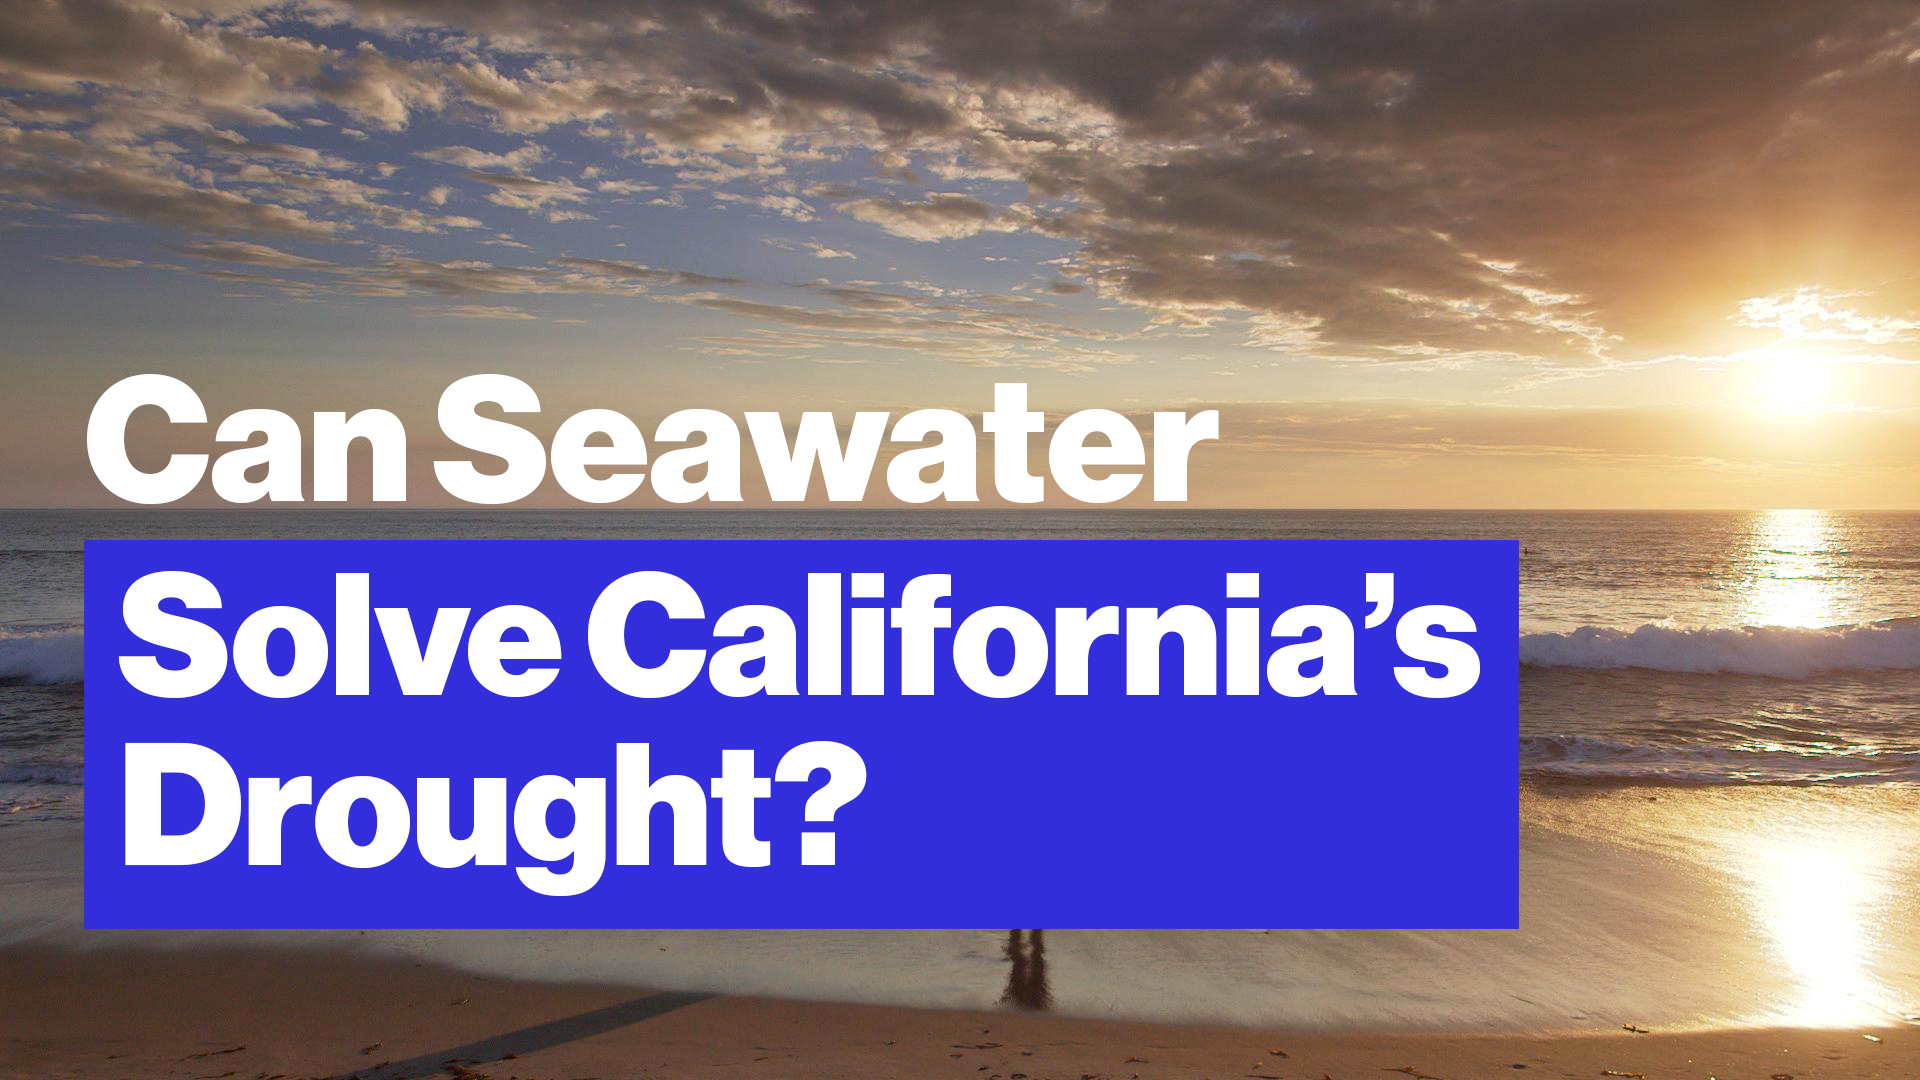 Can Seawater Desalination Solve California's Drought?